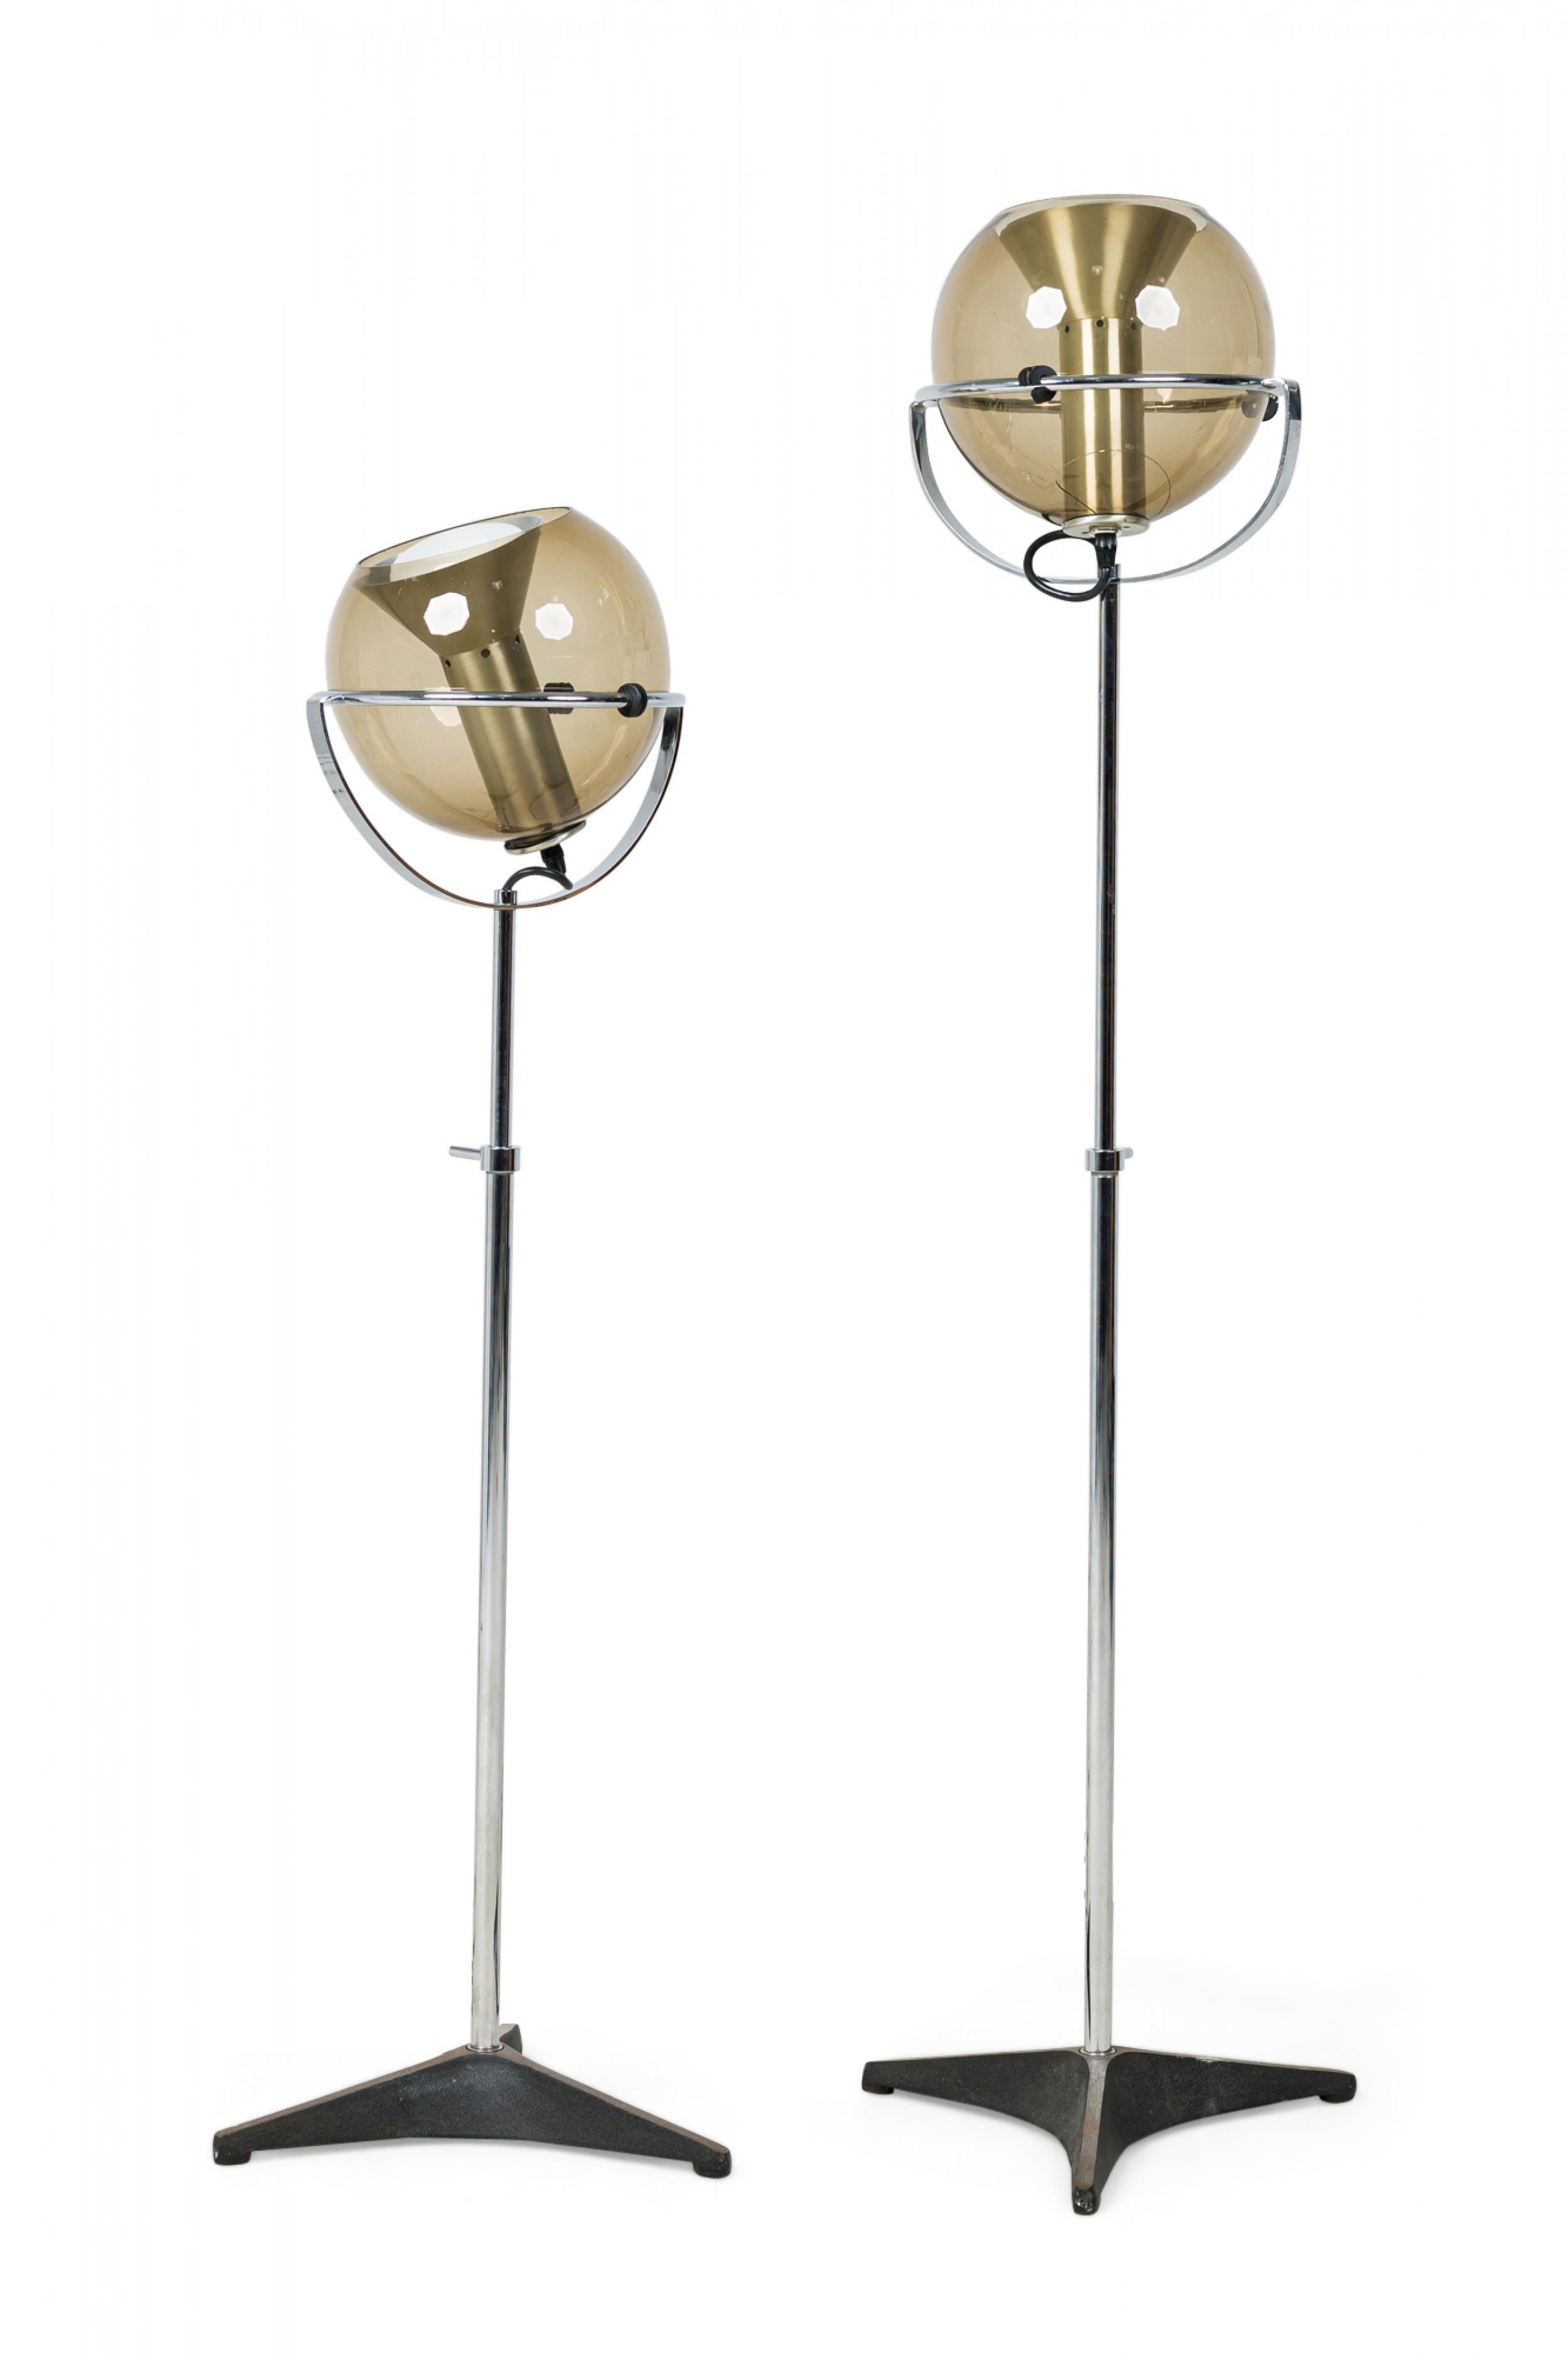 PAIR of midcentury Dutch Modern (1960s) floor lamps with smoked glass globes mounted on a silver metal adjustable height stands and triangular bases (Frank Ligtelijn FOR RAAK) (PRICED AS PAIR).